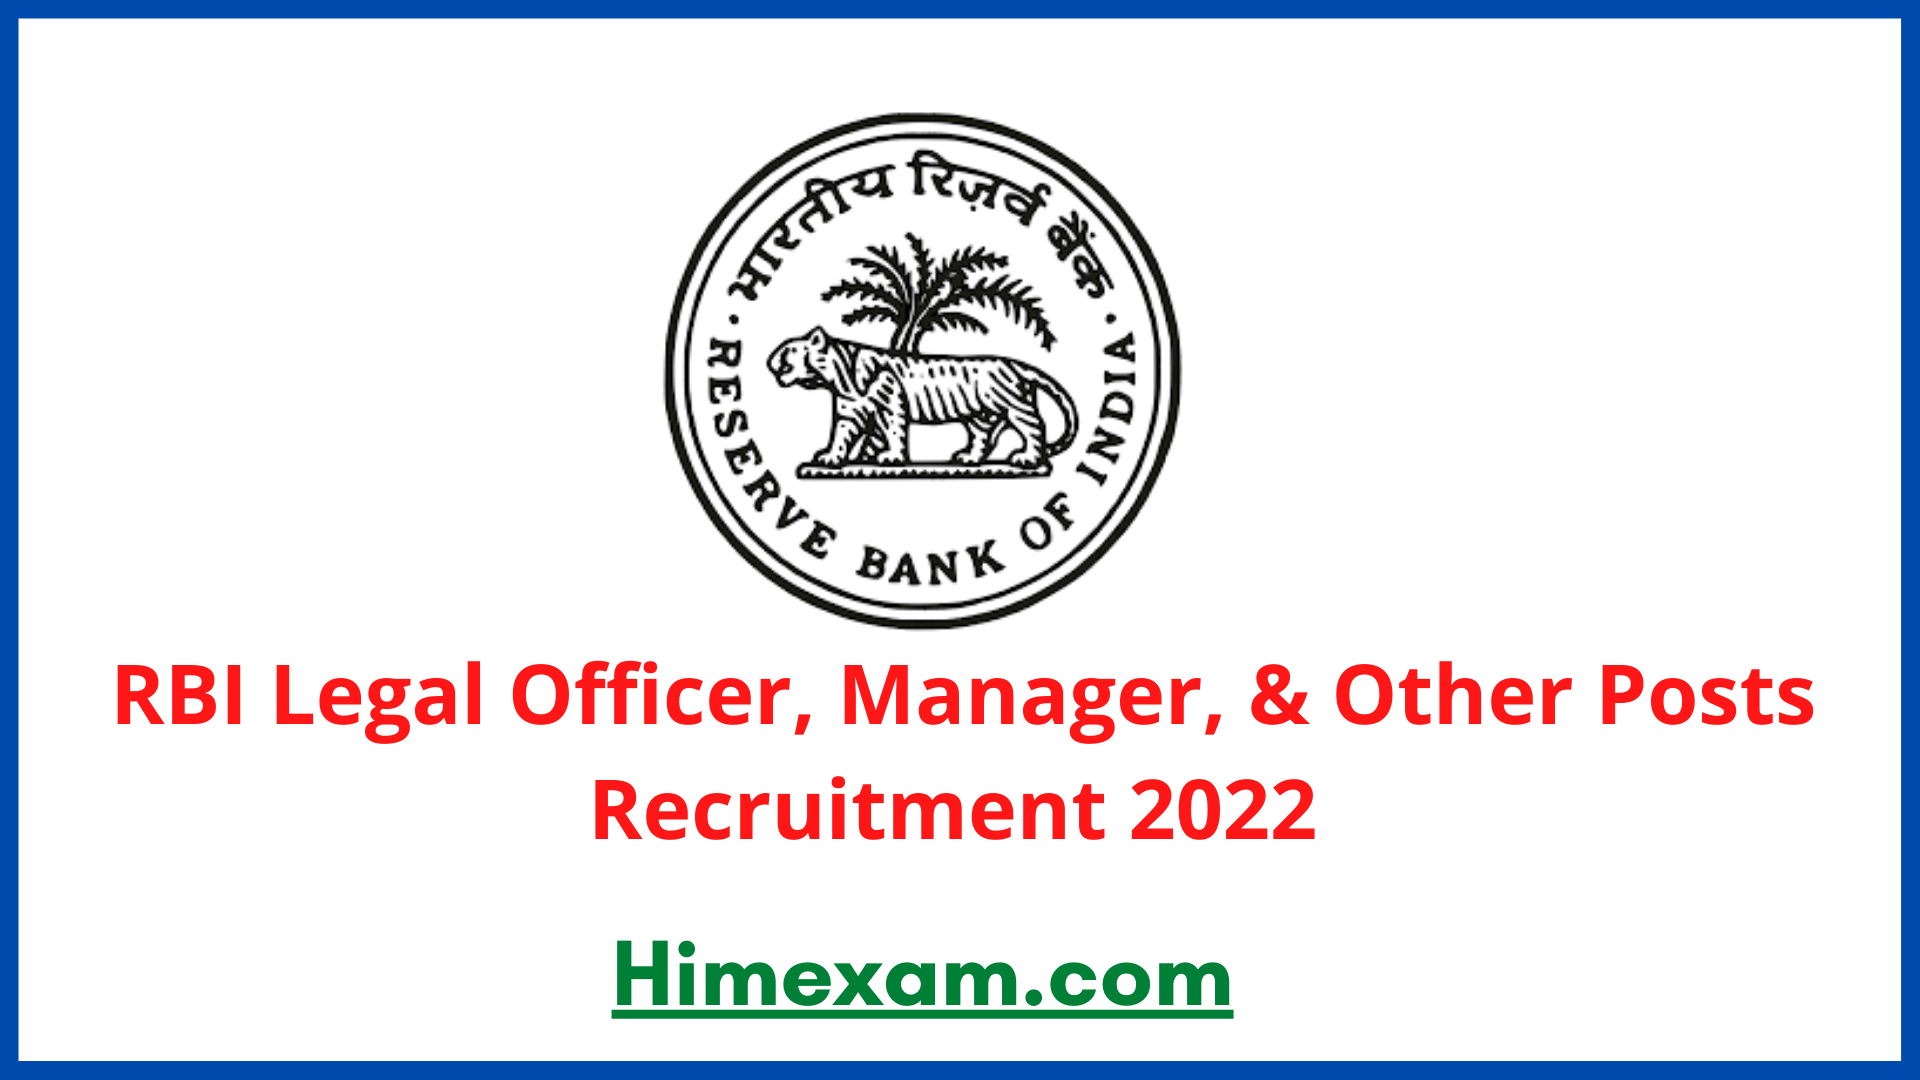 RBI Legal Officer, Manager, & Other Posts Recruitment 2022